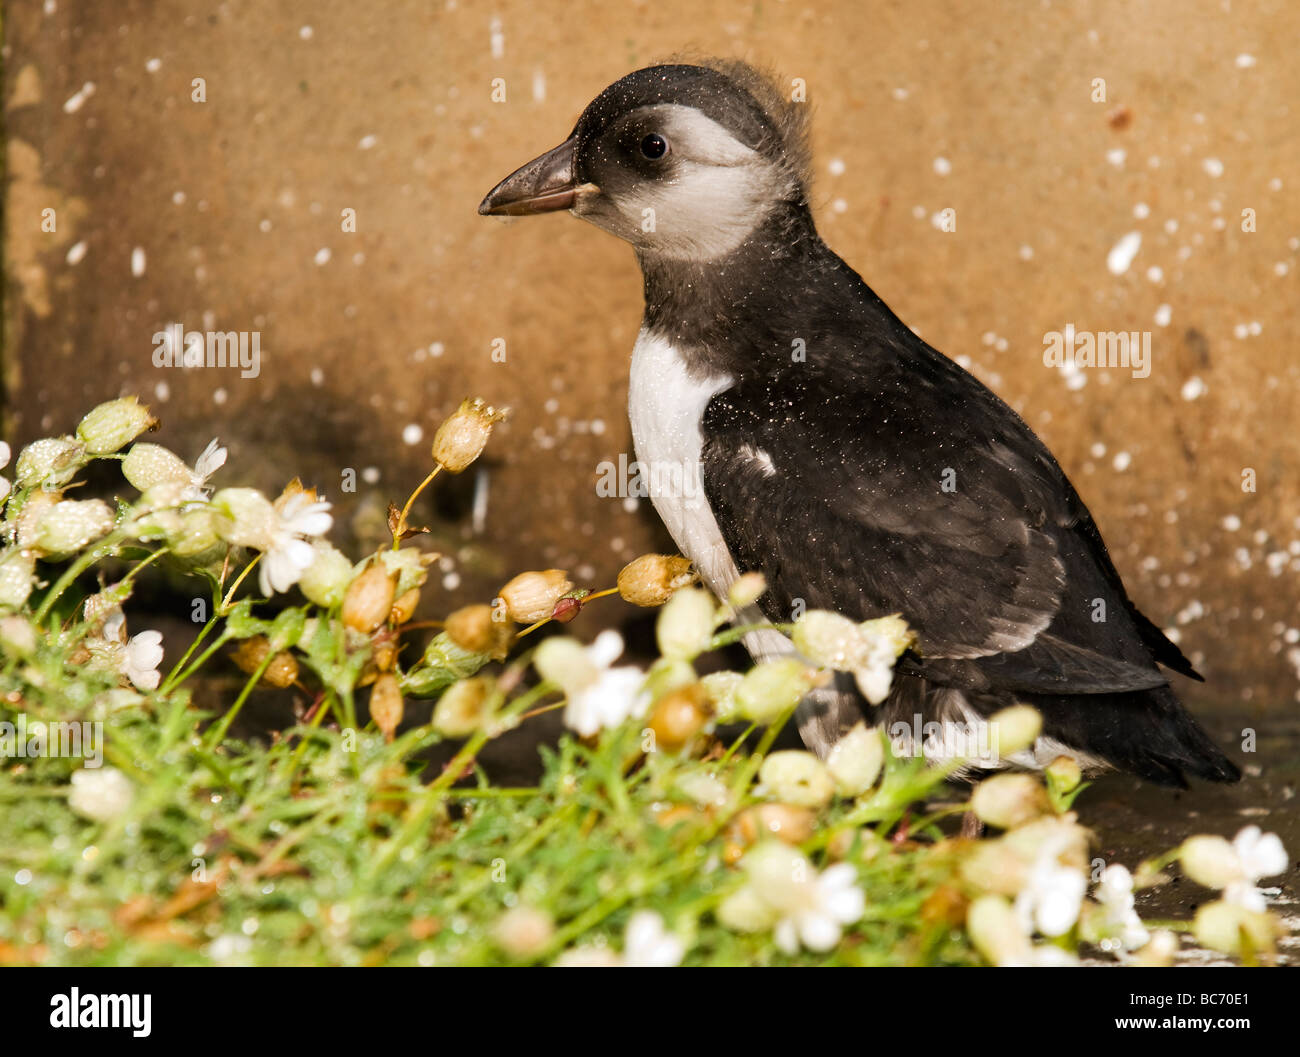 young scared puffling walking around Low Light lighthouse on Isley of May Stock Photo